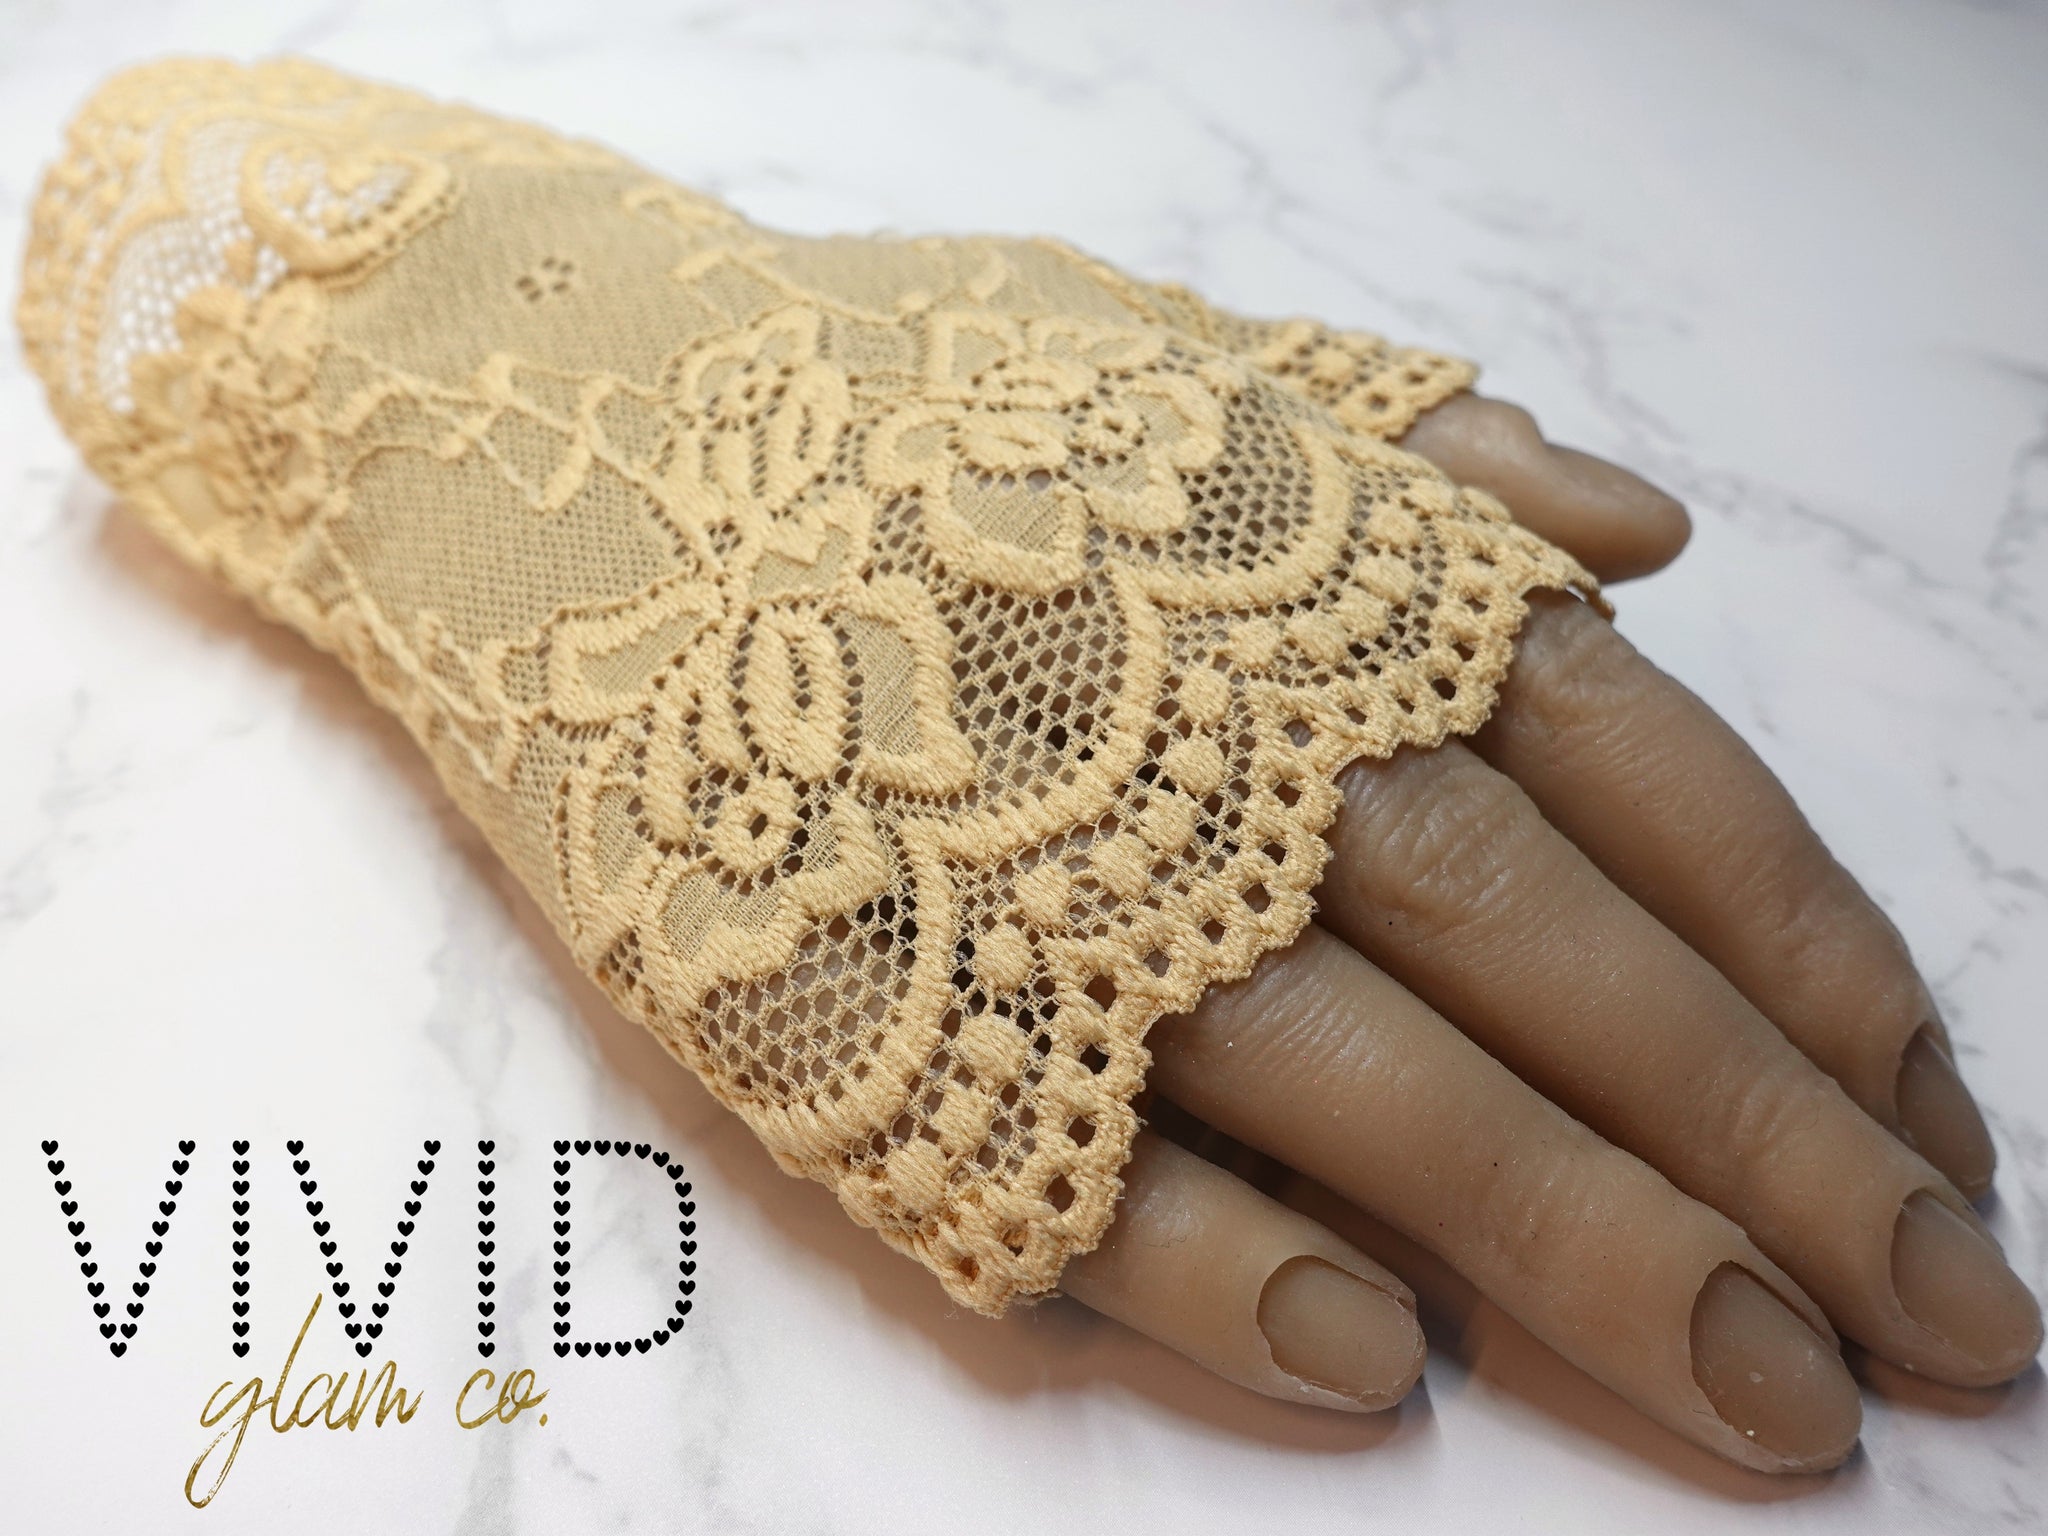 Lace Glam Glove - Peachy Nude